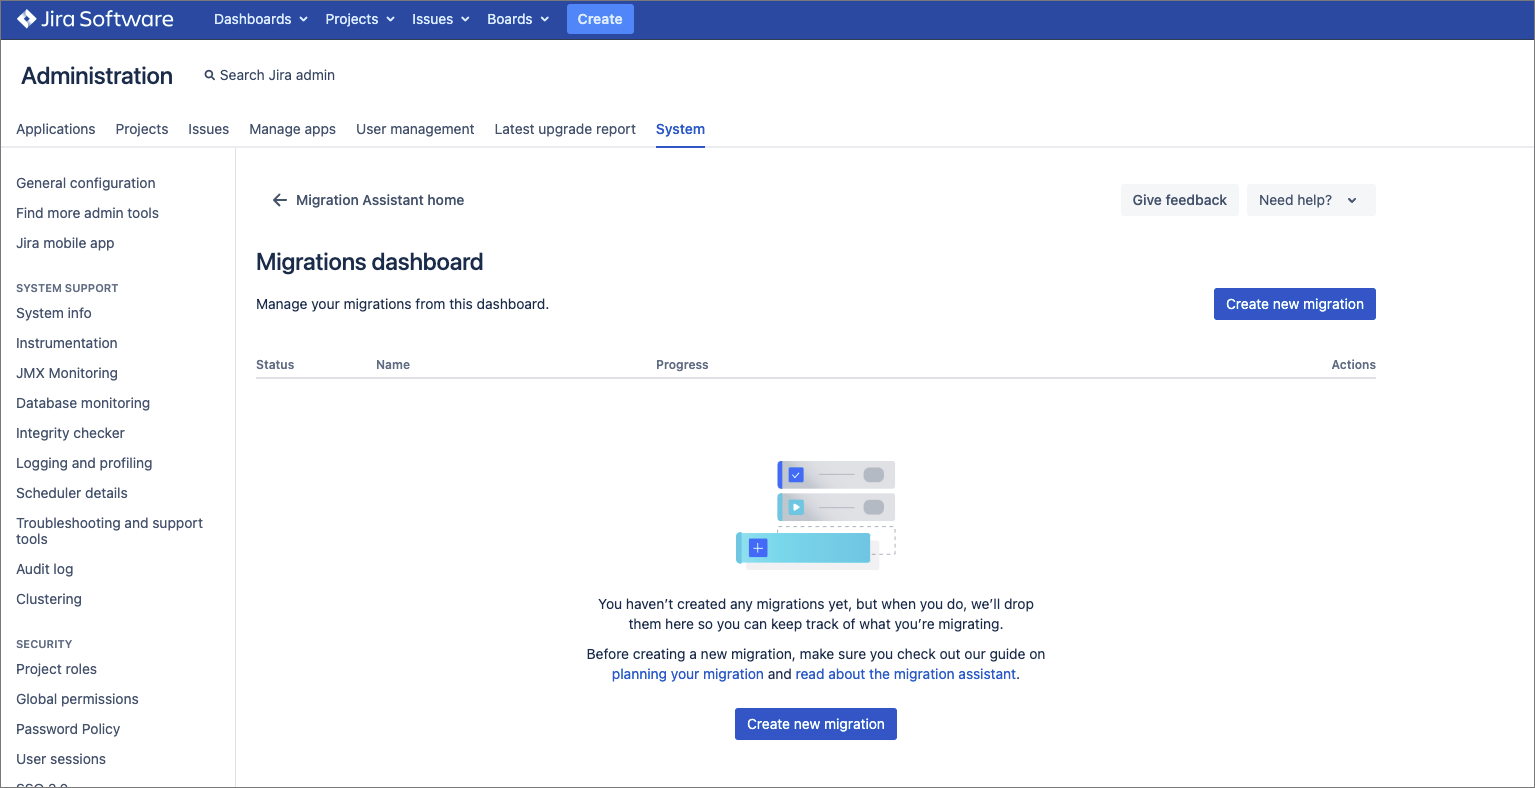 The Migrations dashboard in Jira.